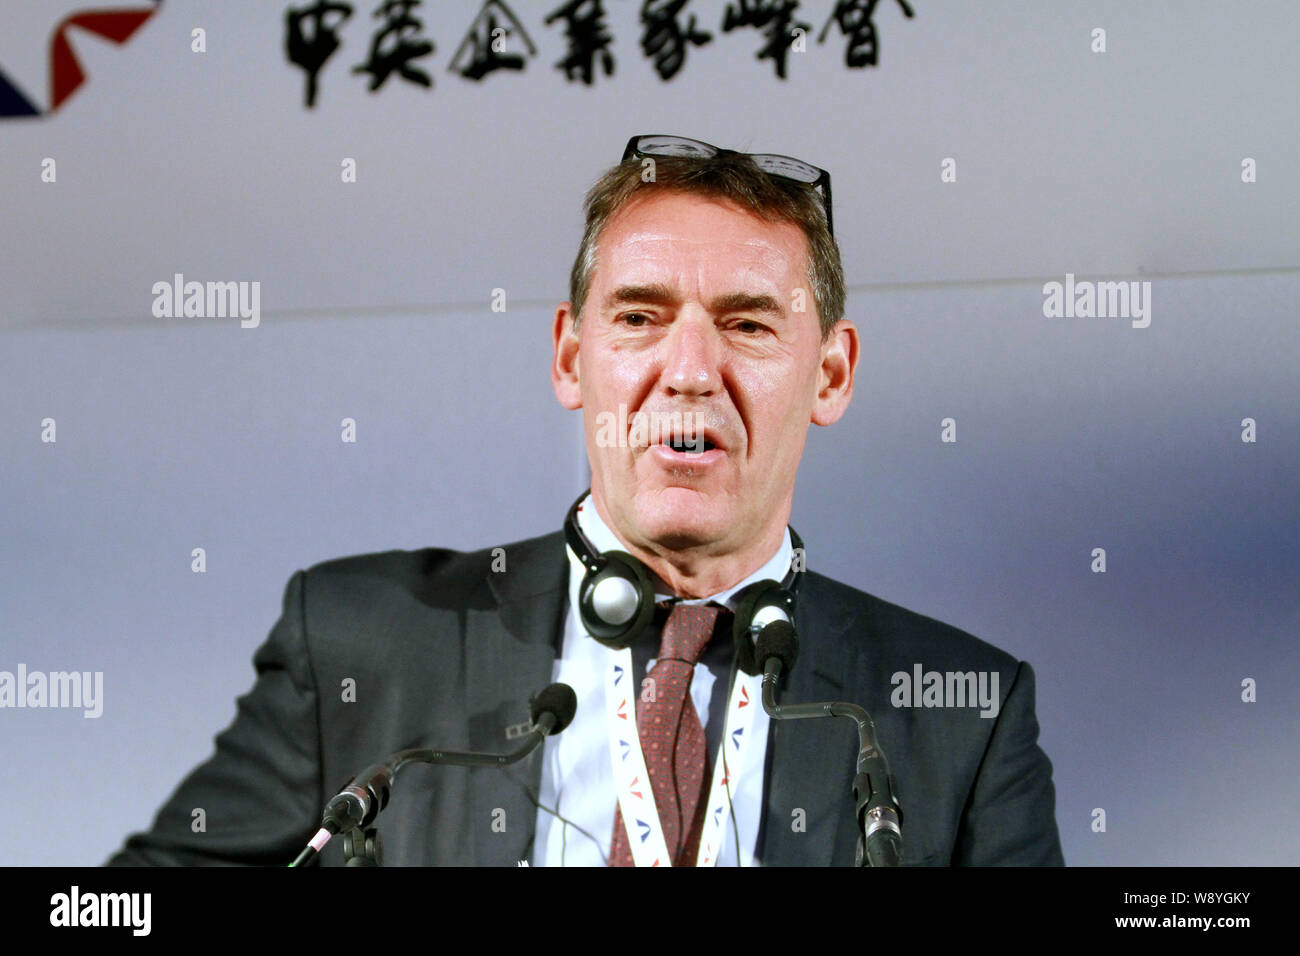 Jim O'Neill, retiring chairman of Goldman Sachs Asset Management, speaks at the 1st UK-China Business Leaders Summit in London, Britain, 2 June 2014. Stock Photo